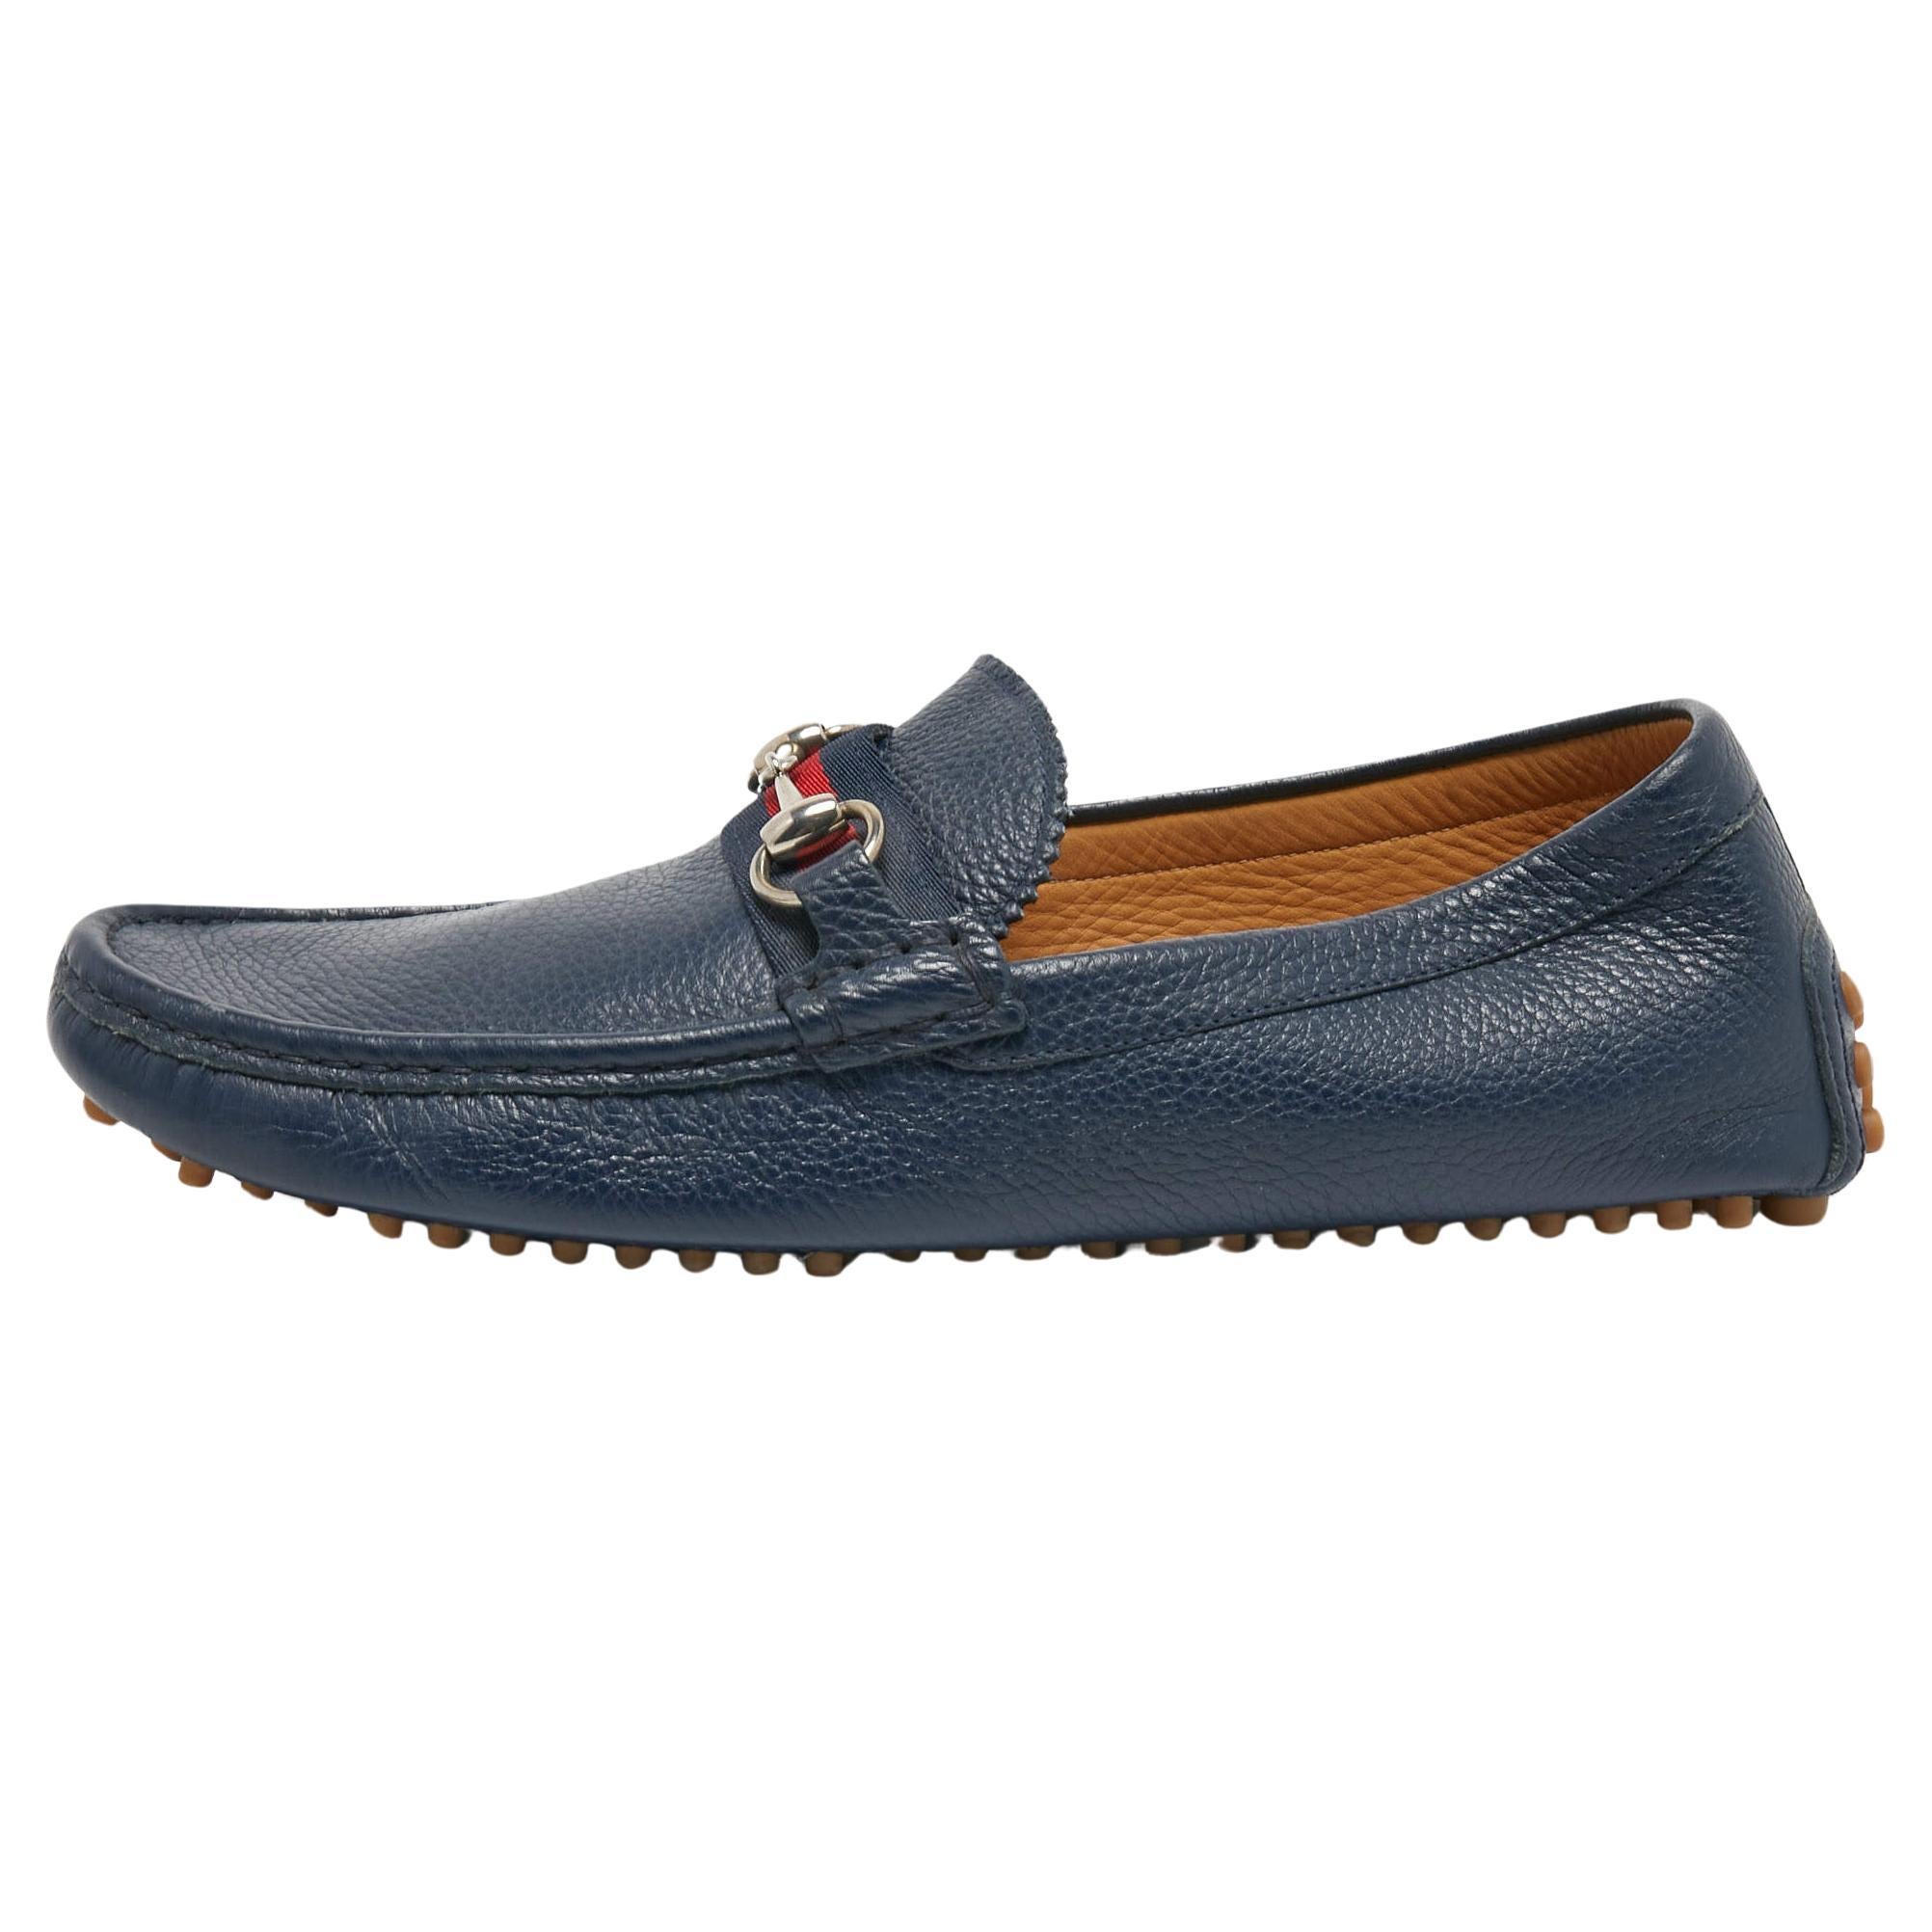 Gucci Navy Blue Leather Horsebit Slip On Loafers Size 42.5